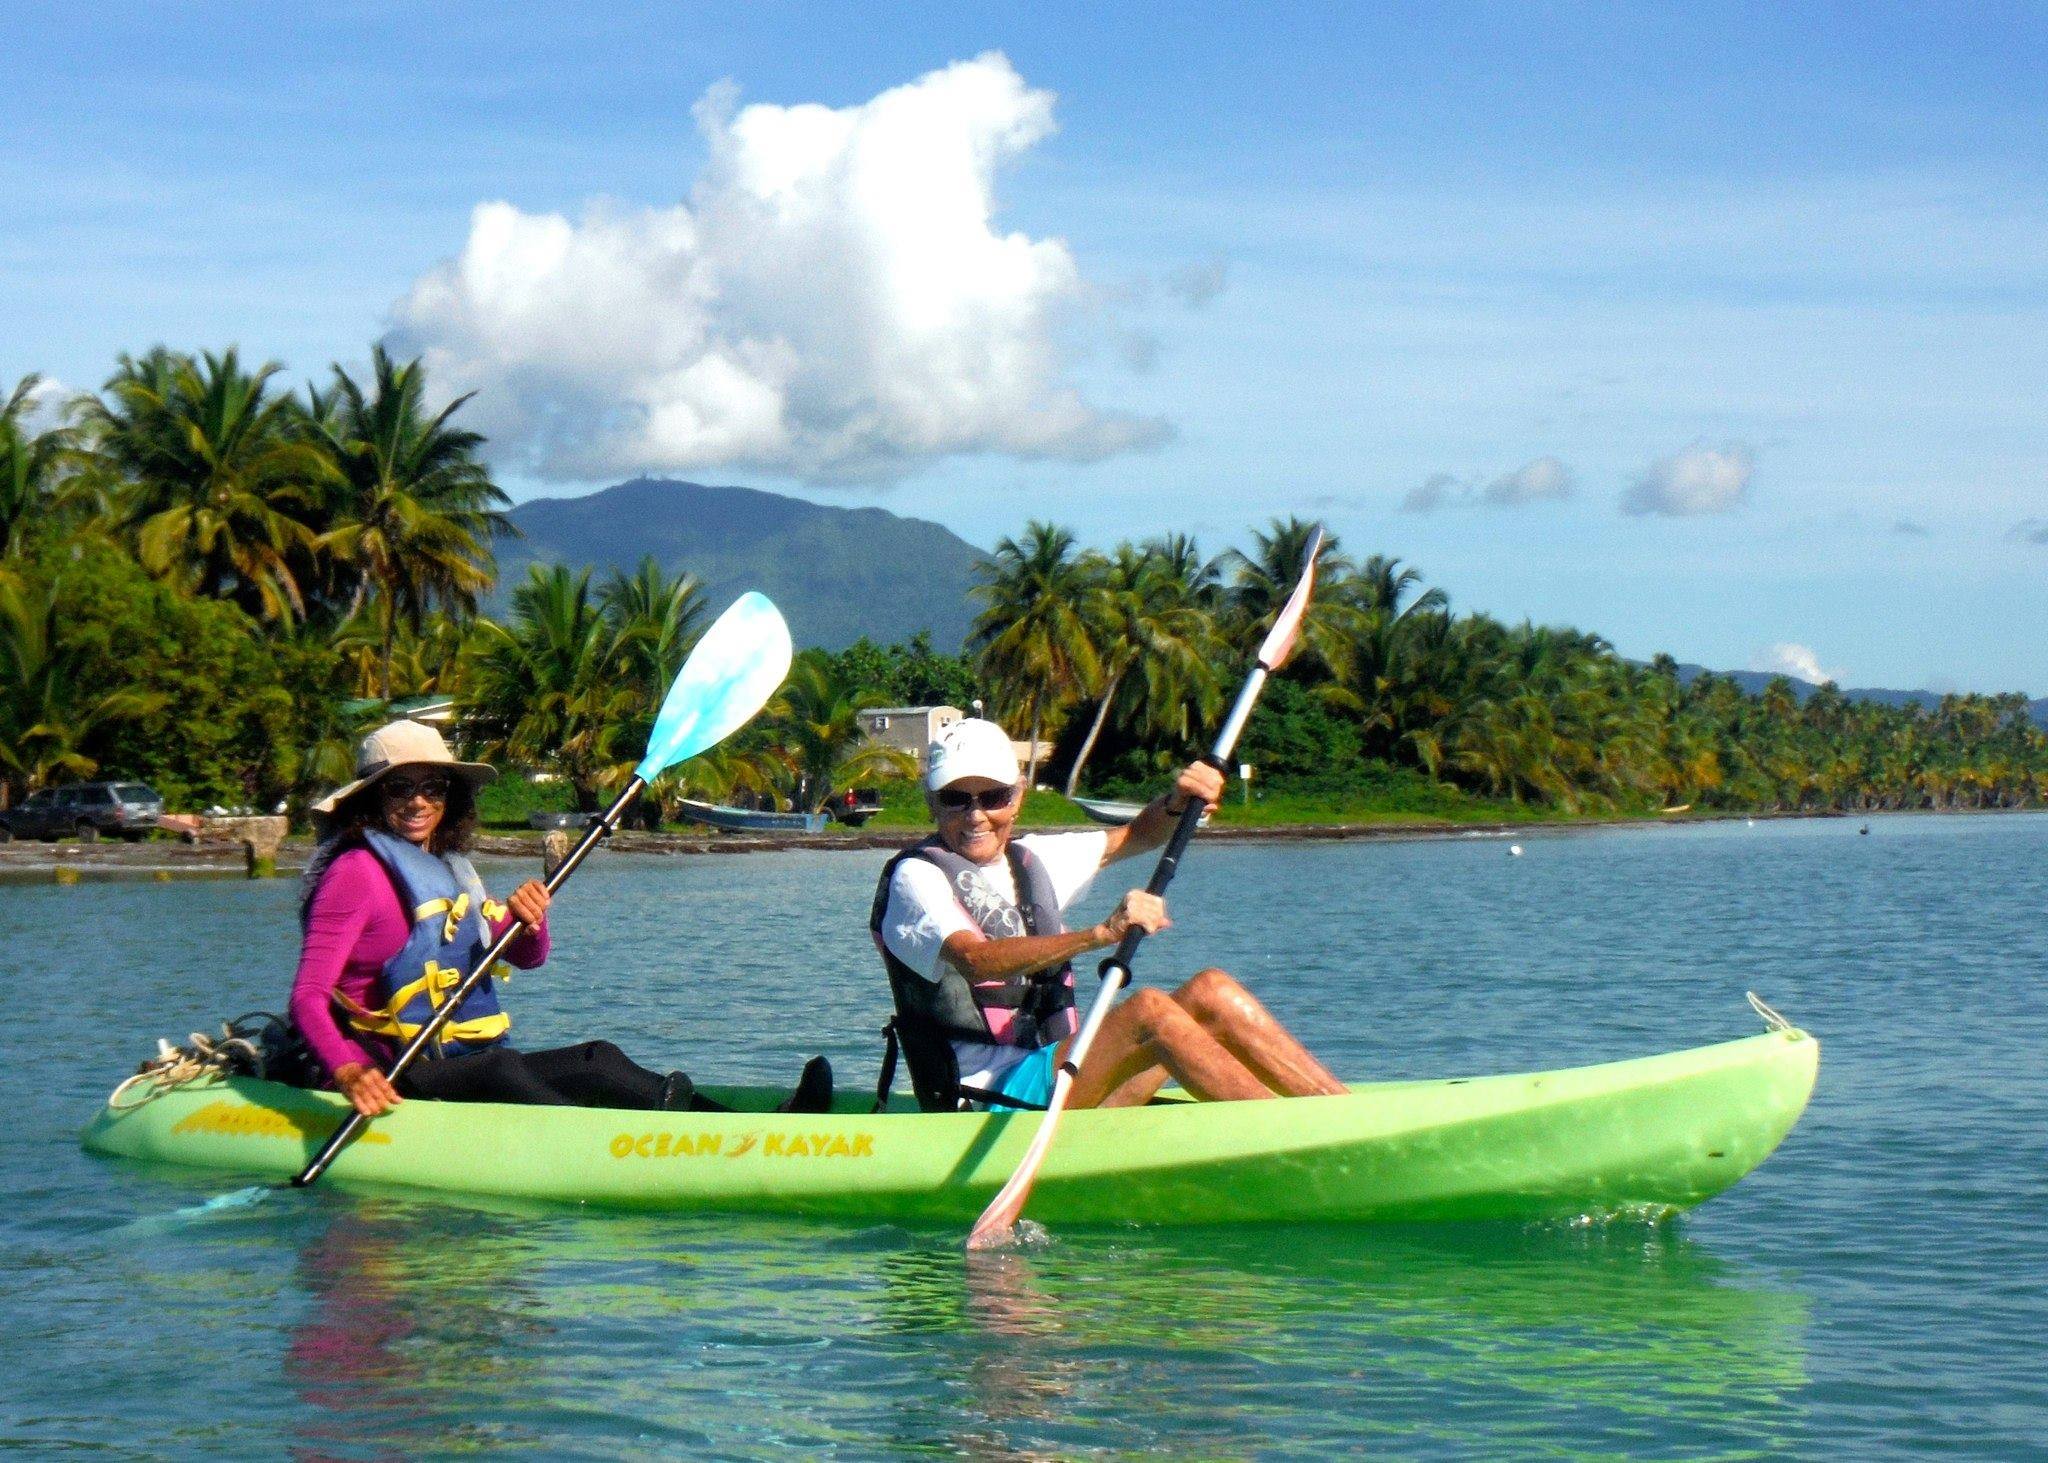 Hotels near El Yunque with Ocean Kayak Tours